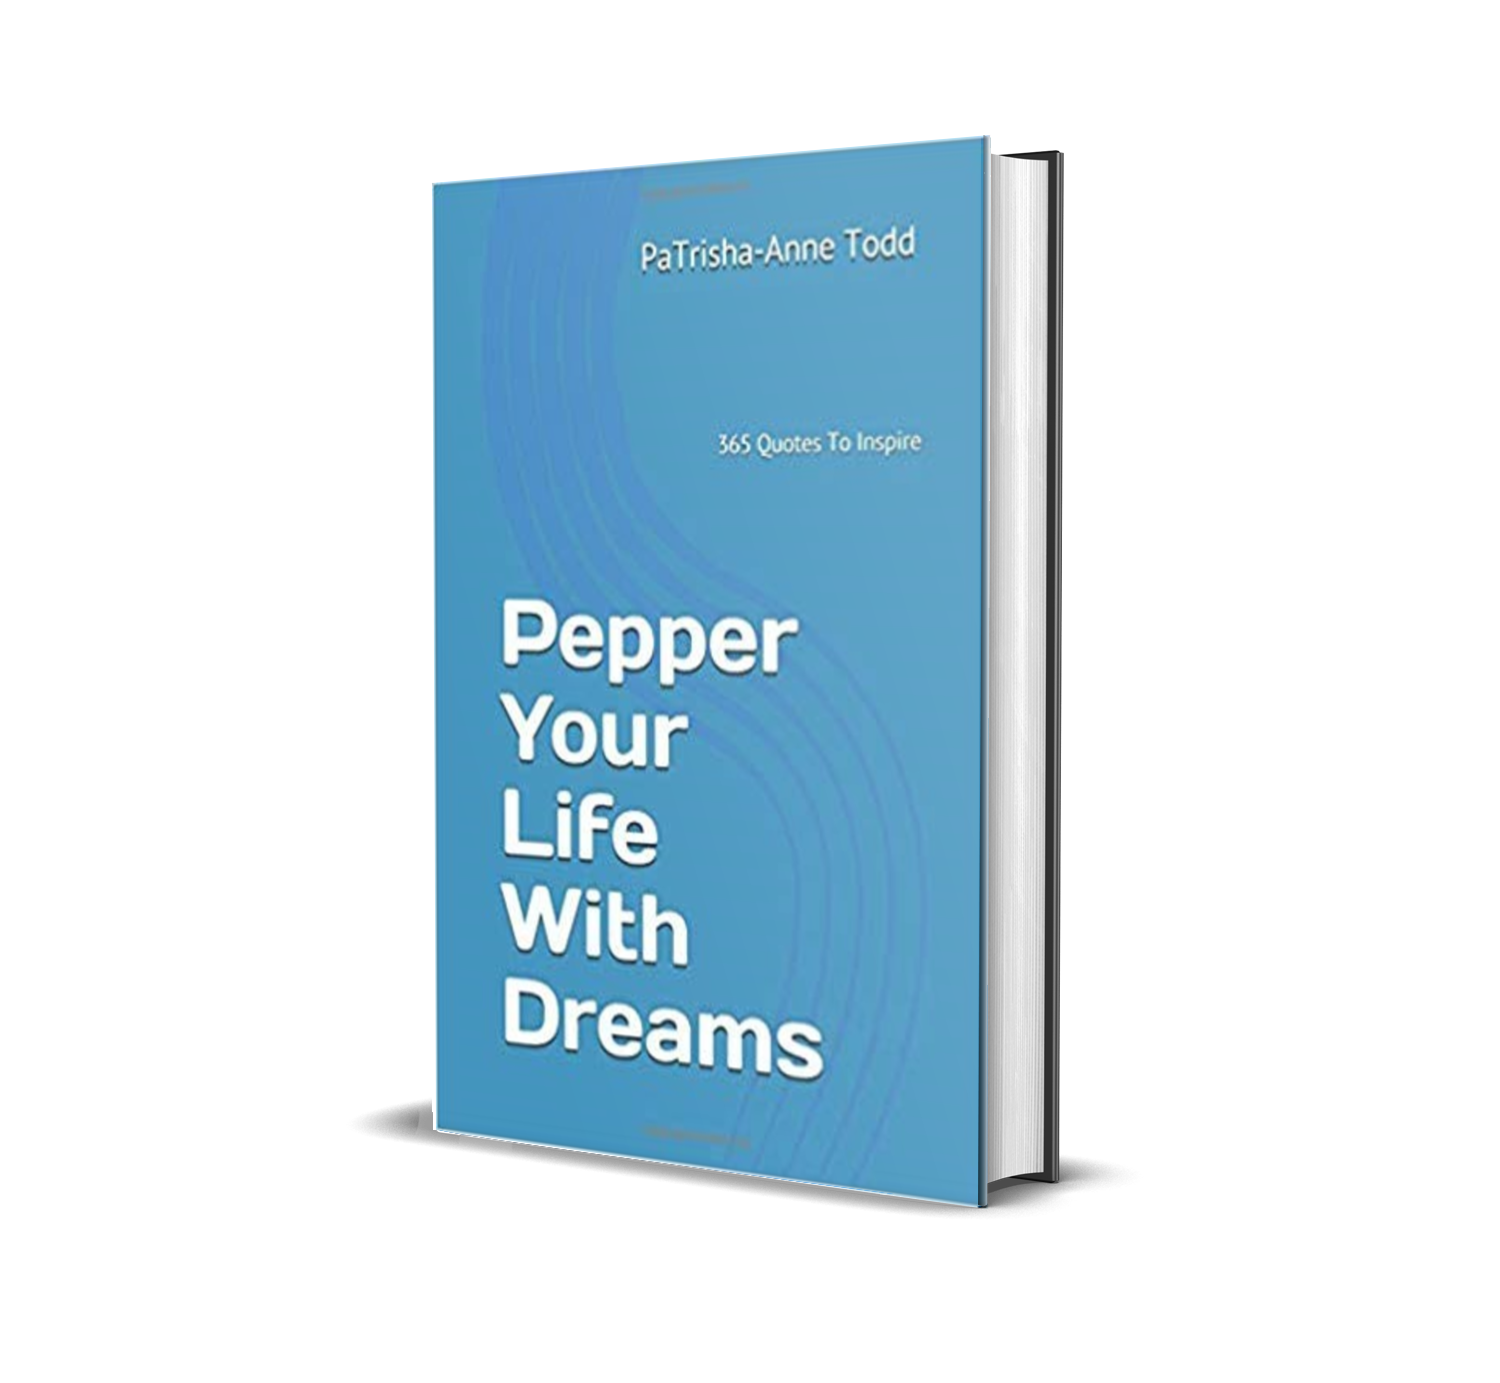 Pepper Your Life with Dreams by Master Lifestyle Coach & Trainer, PaTrisha-Anne Todd at 'CoachingLeadsToSuccess.com'